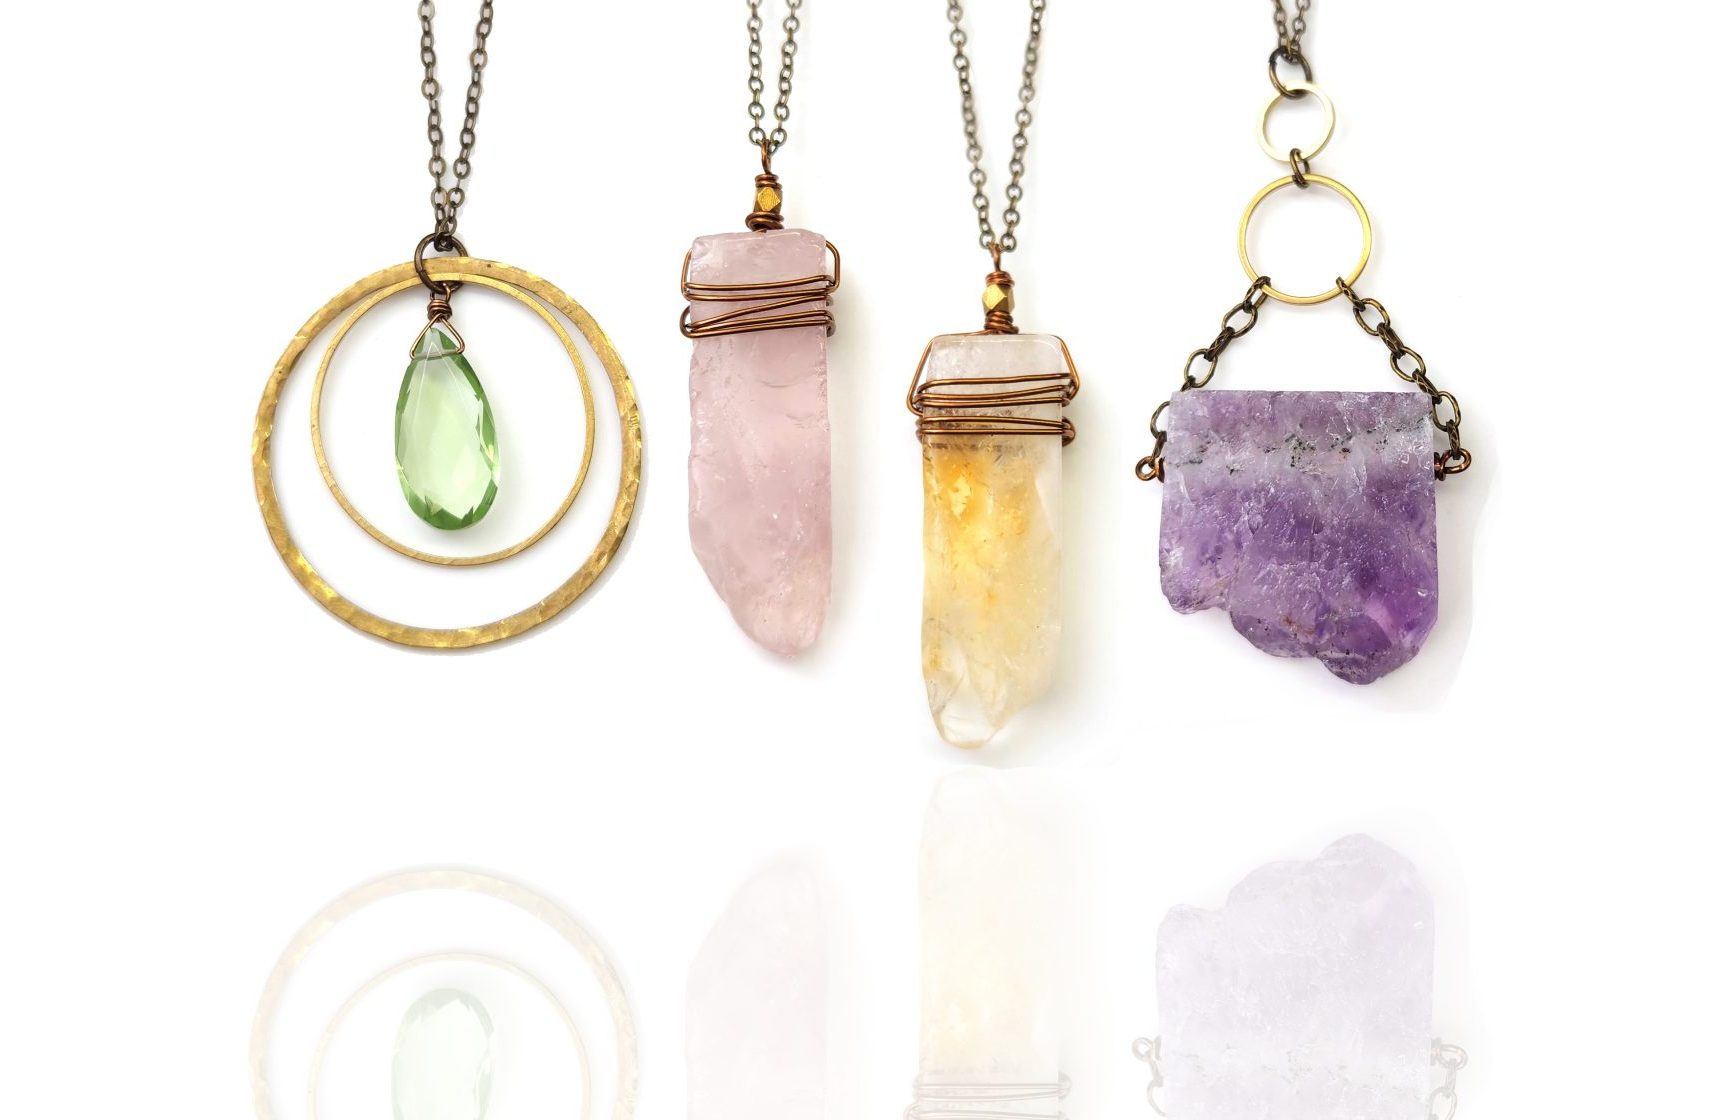 What does your favorite gemstone color say about you?